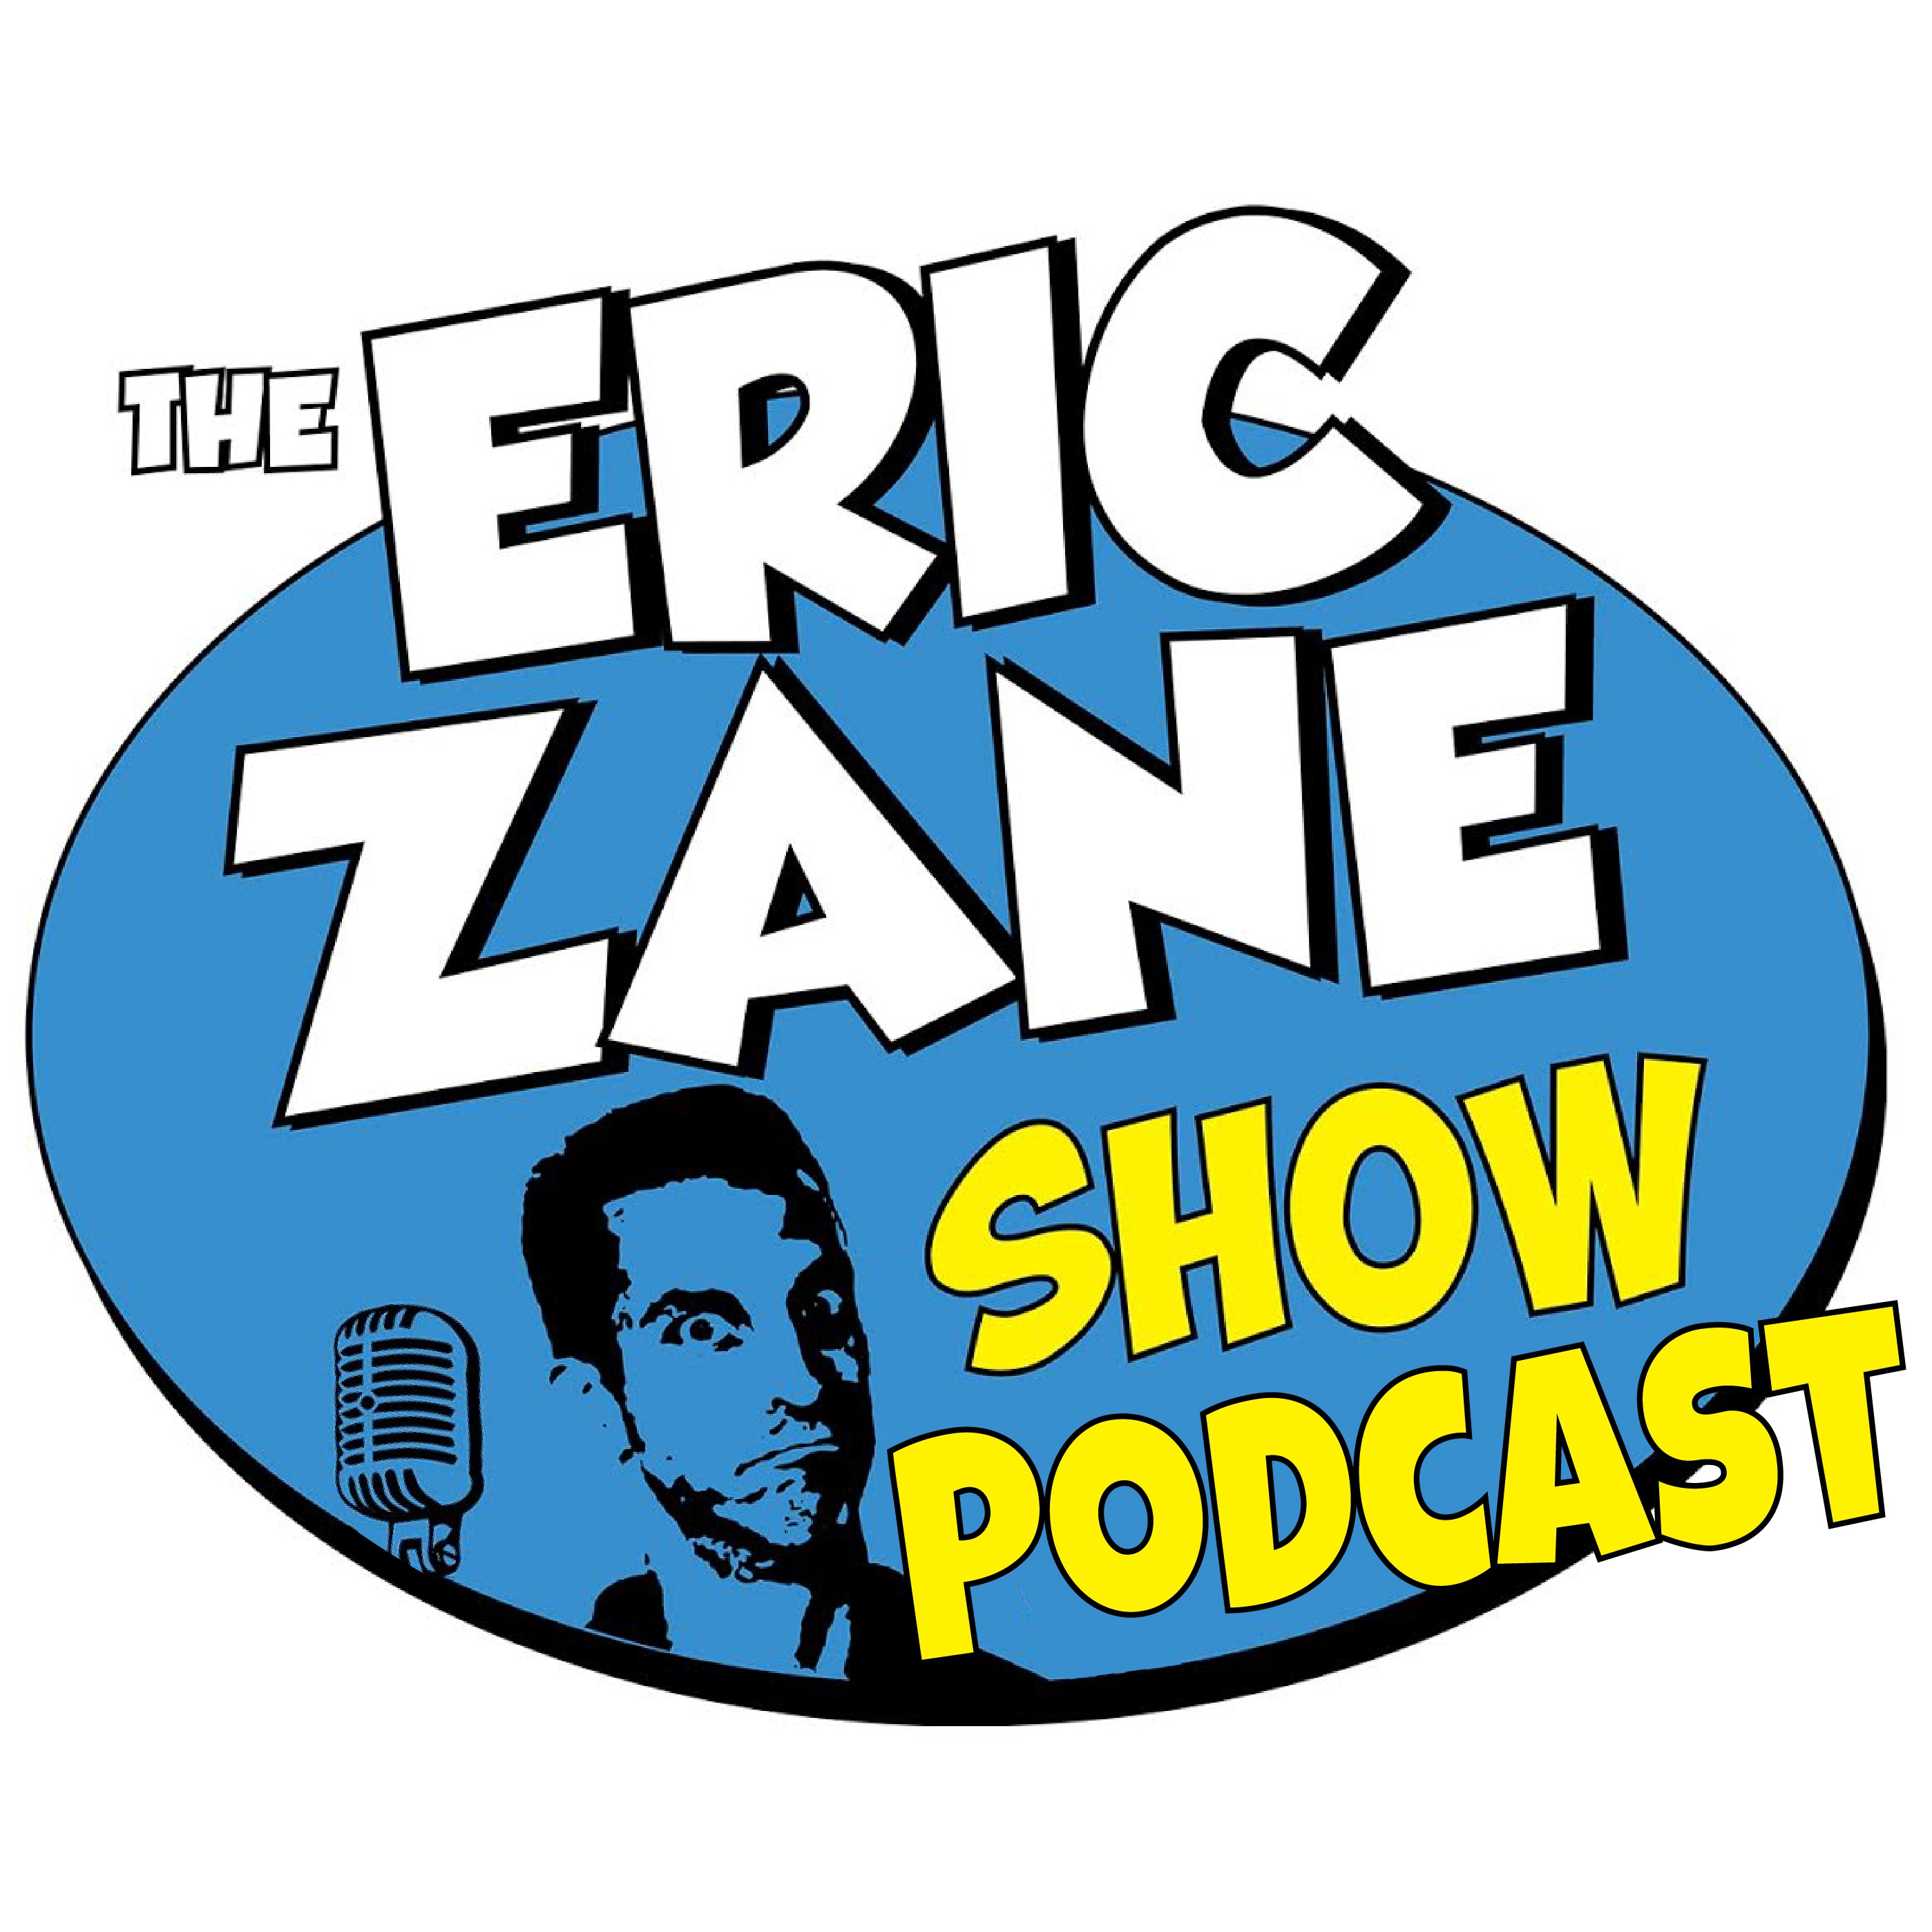 Best of the Eric Zane Show Podcast 5/26/22